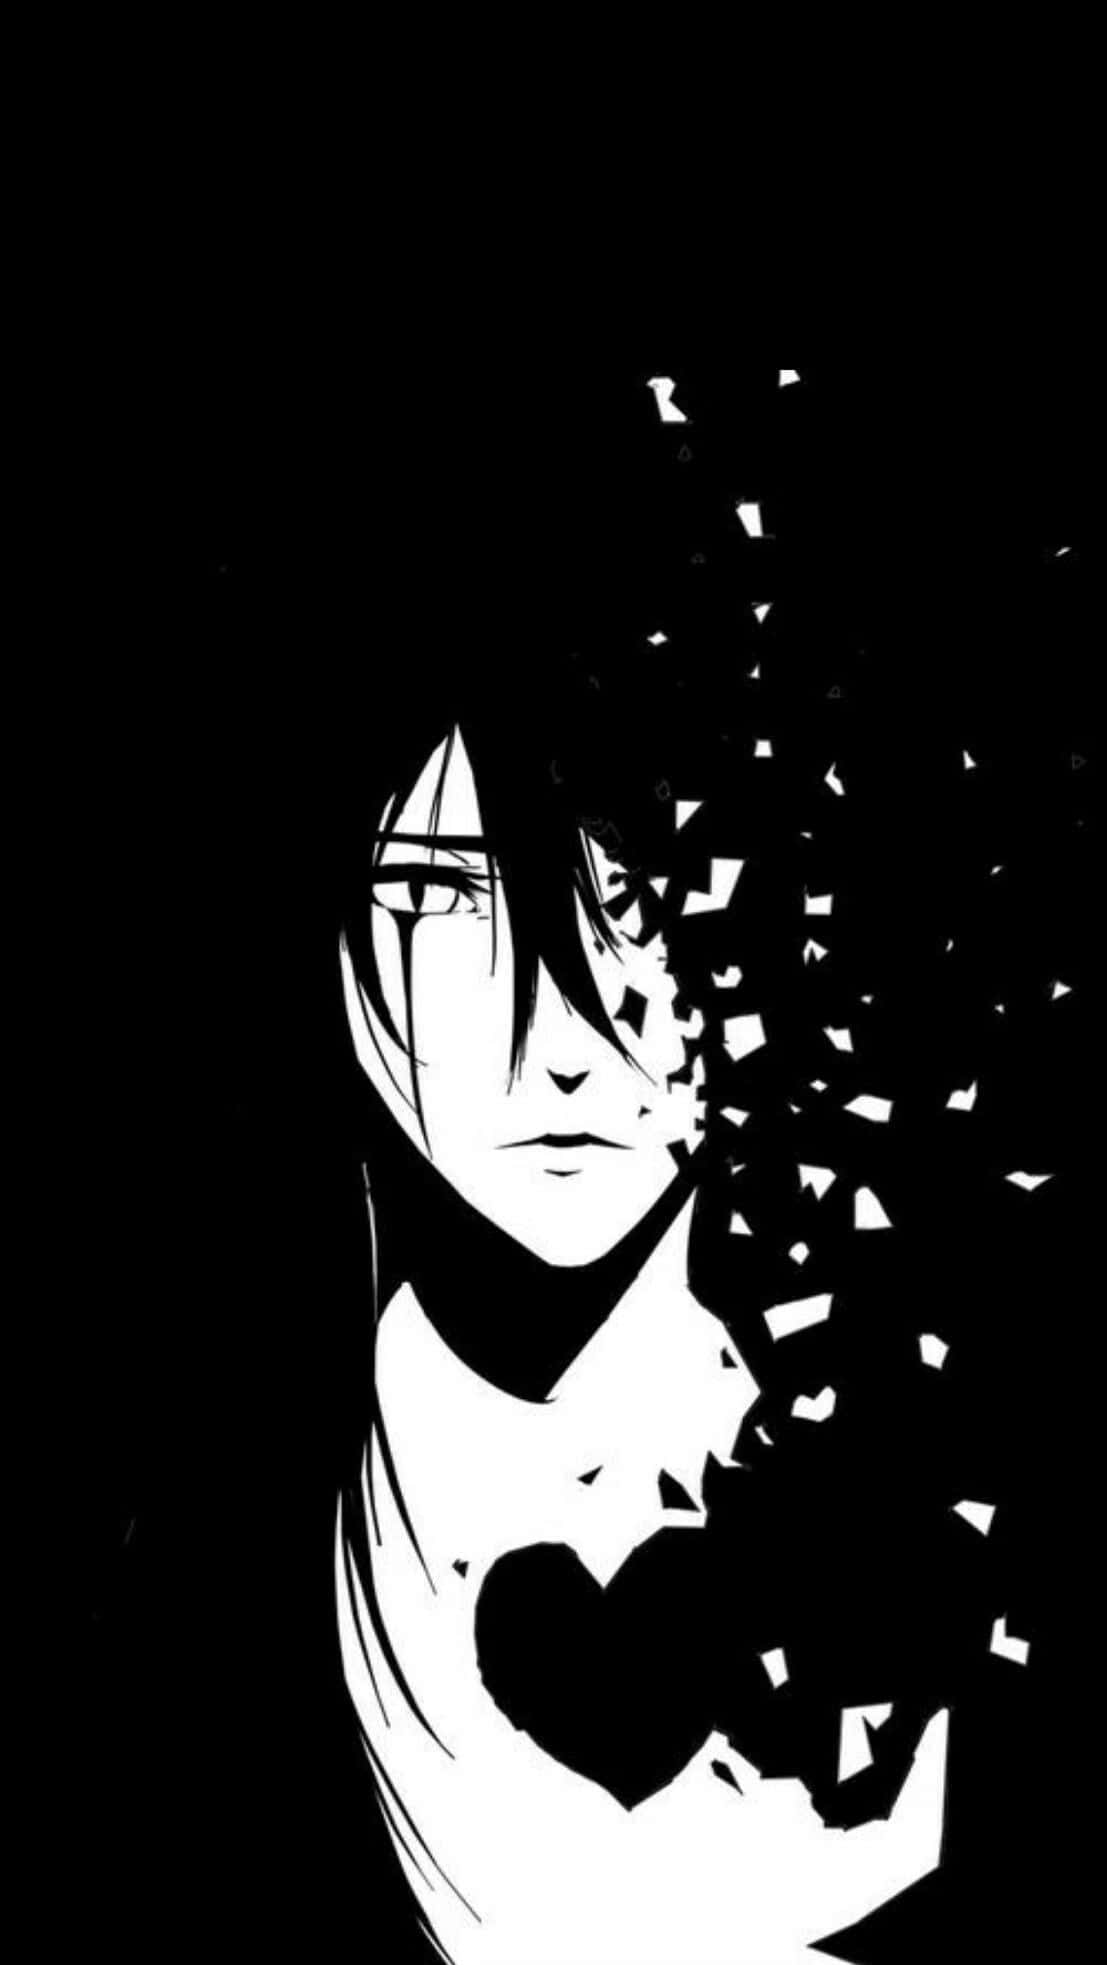 Download Black And White Anime PFP Aesthetic Wallpaper | Wallpapers.com